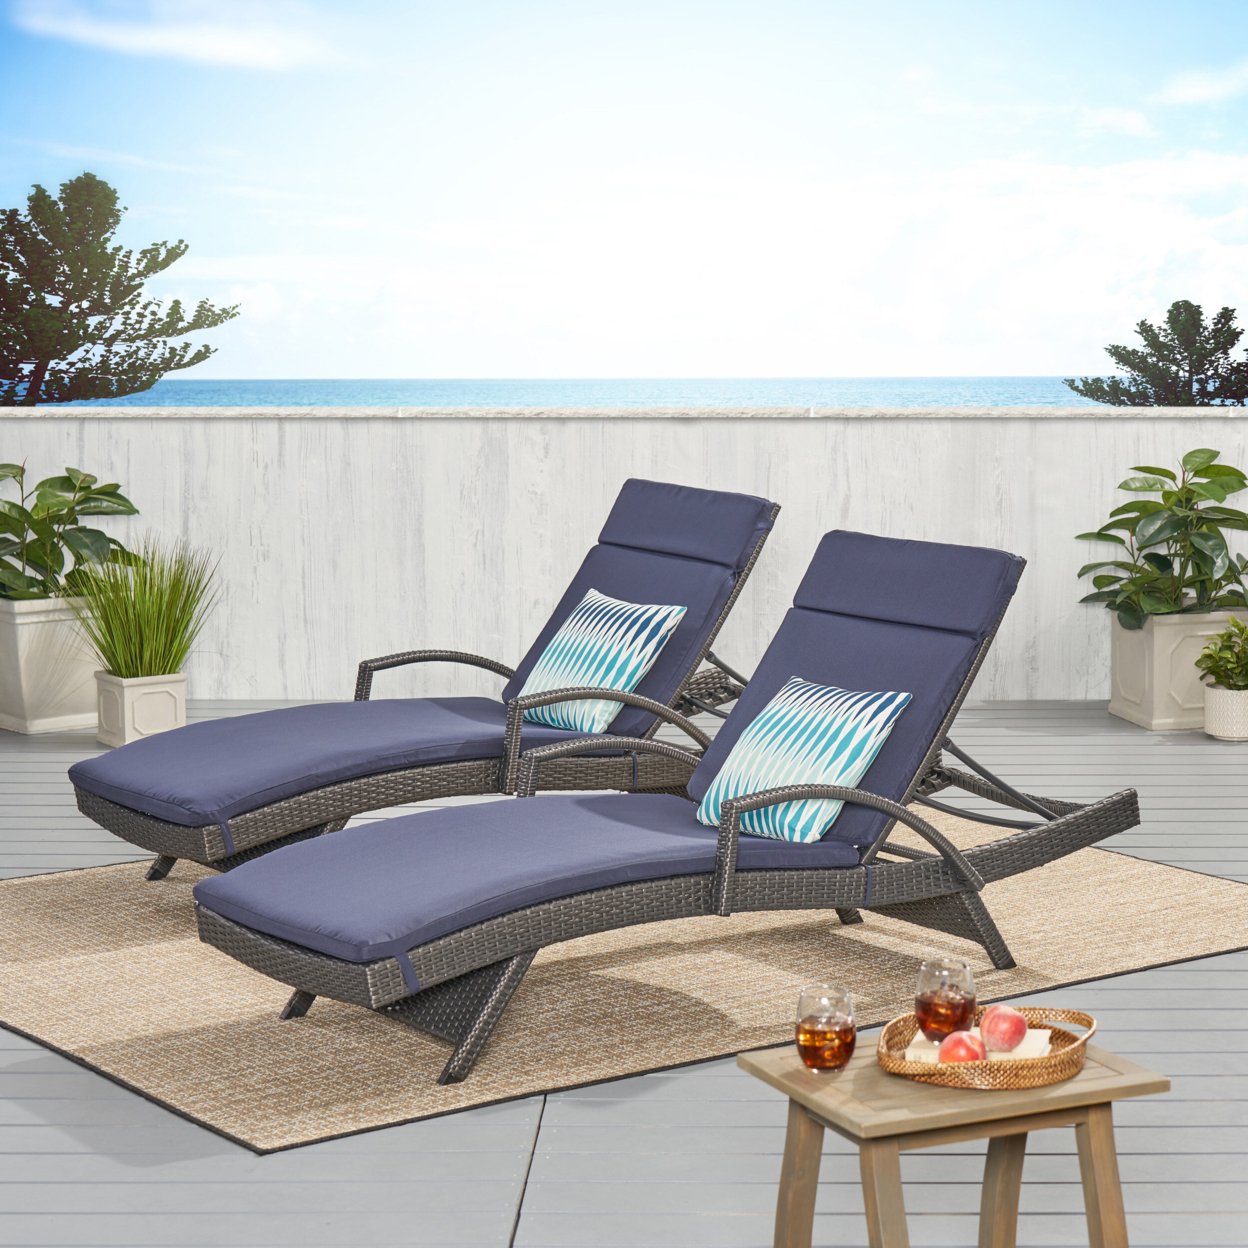 Soleil Outdoor Wicker Chaise Lounges With Water Resistant Cushions (Set Of 2) - Navy Blue